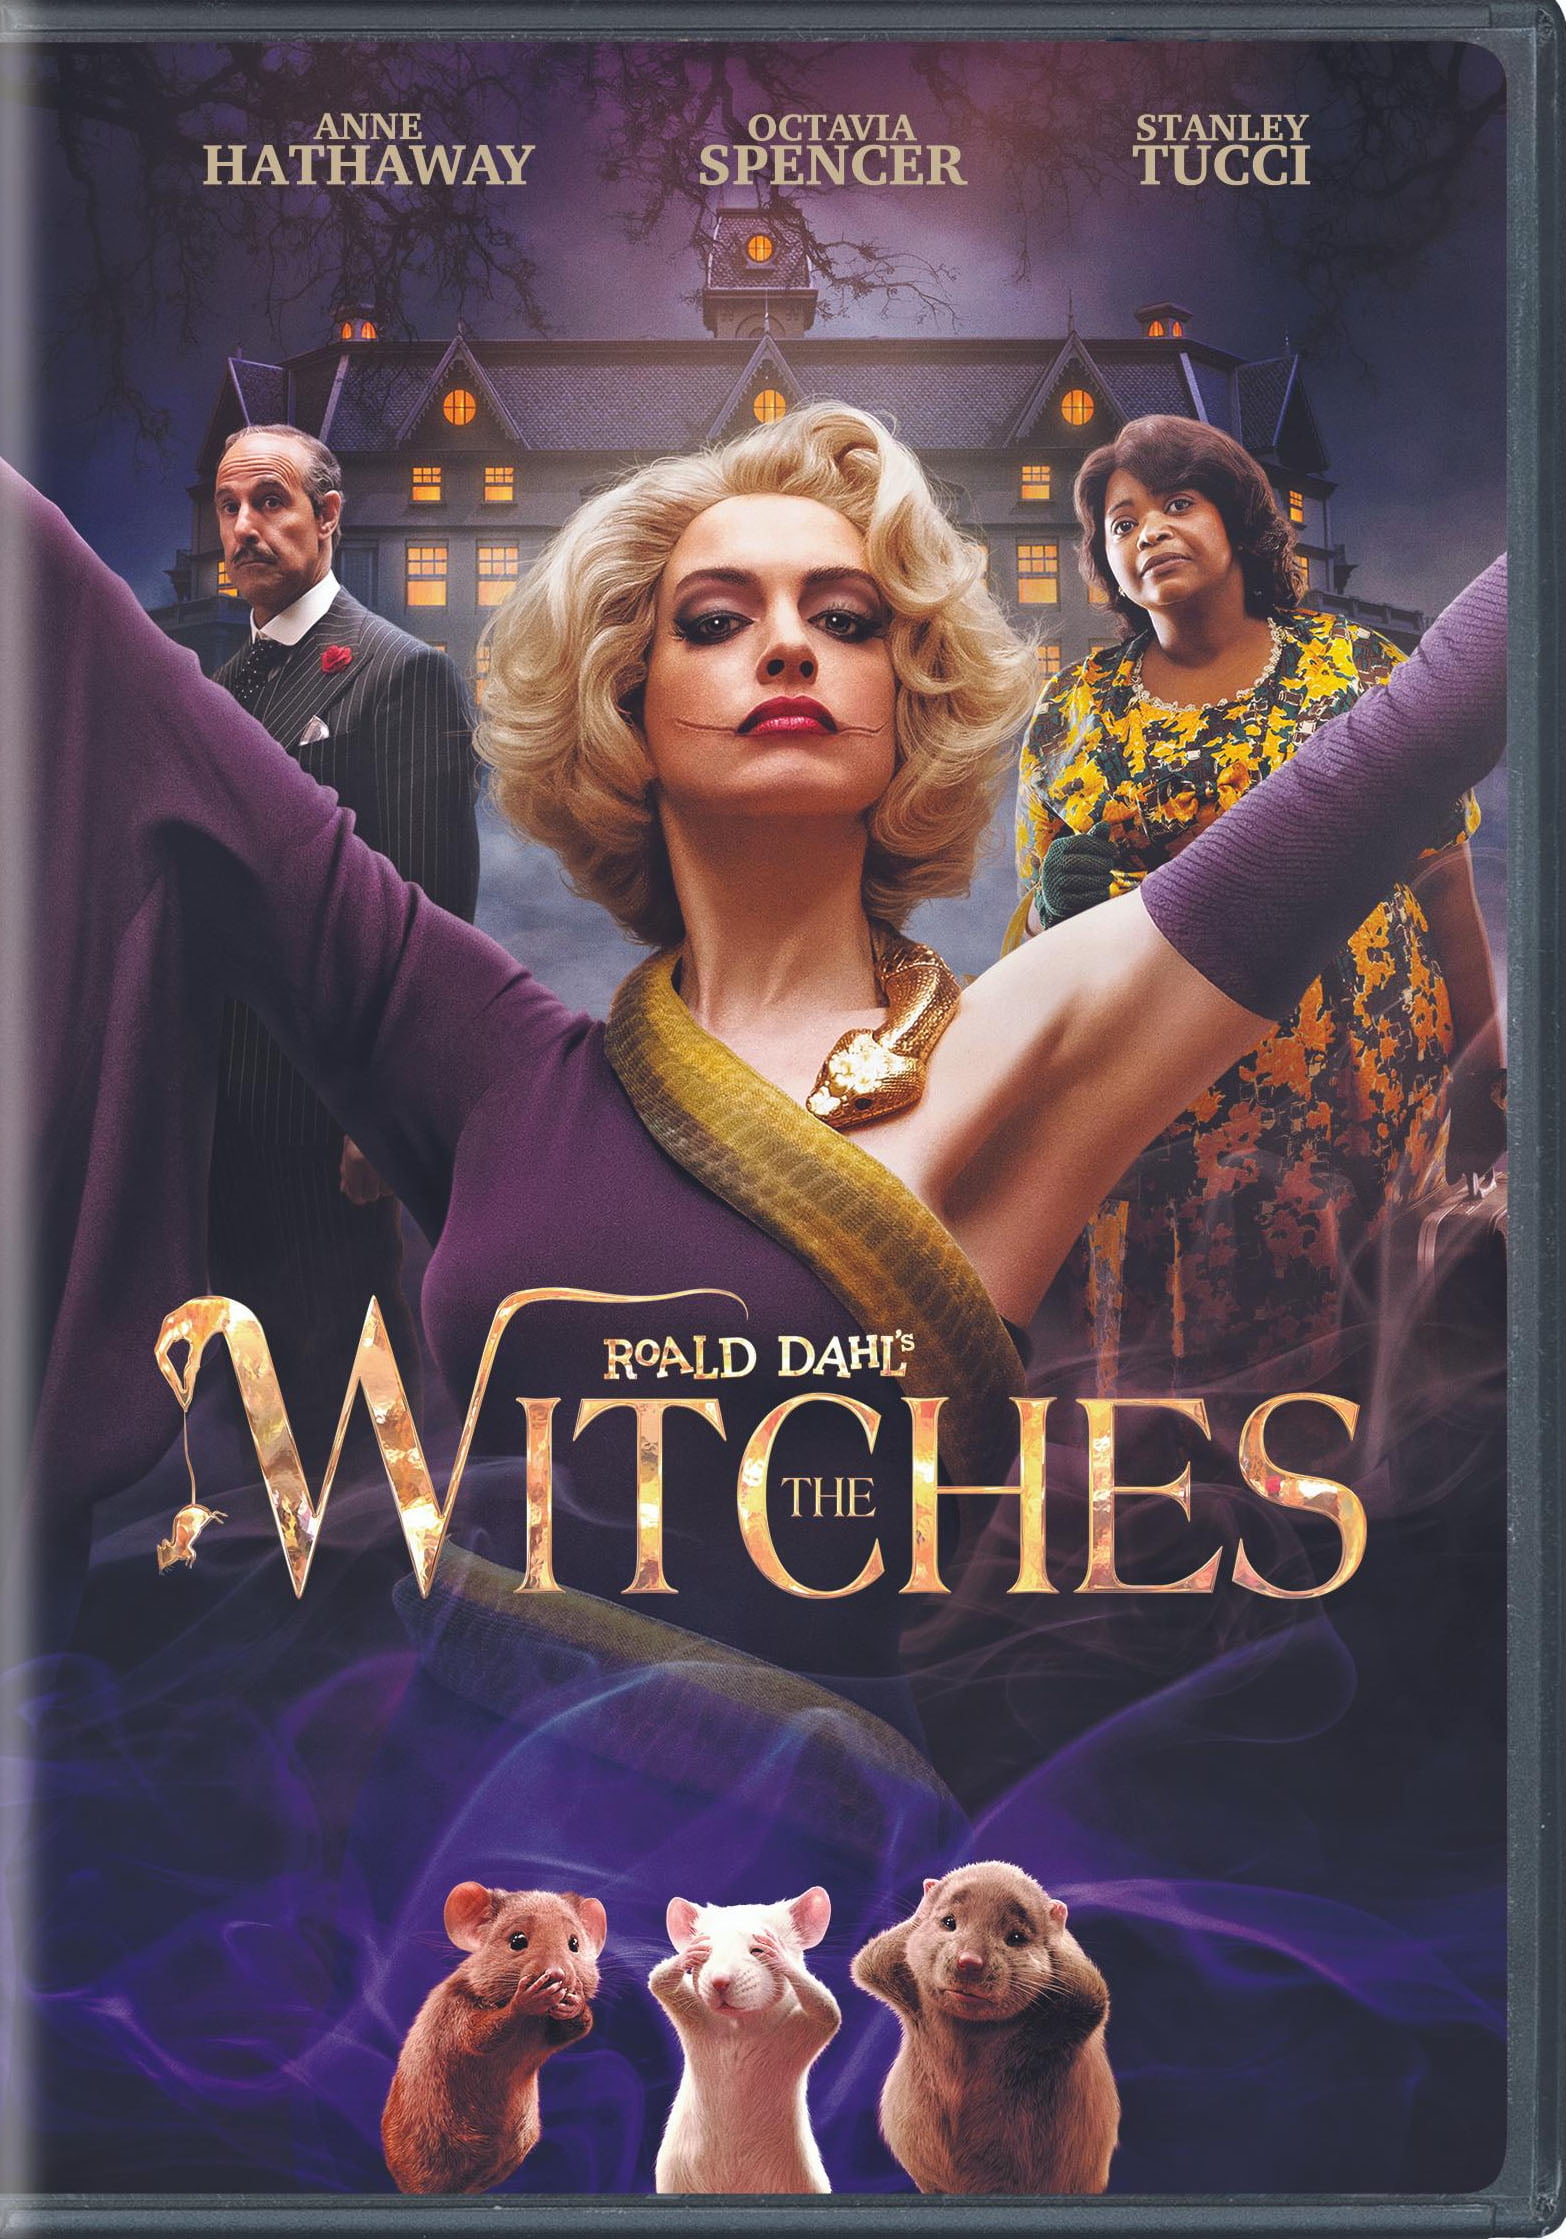 The Witches (DVD) - Walmart.com